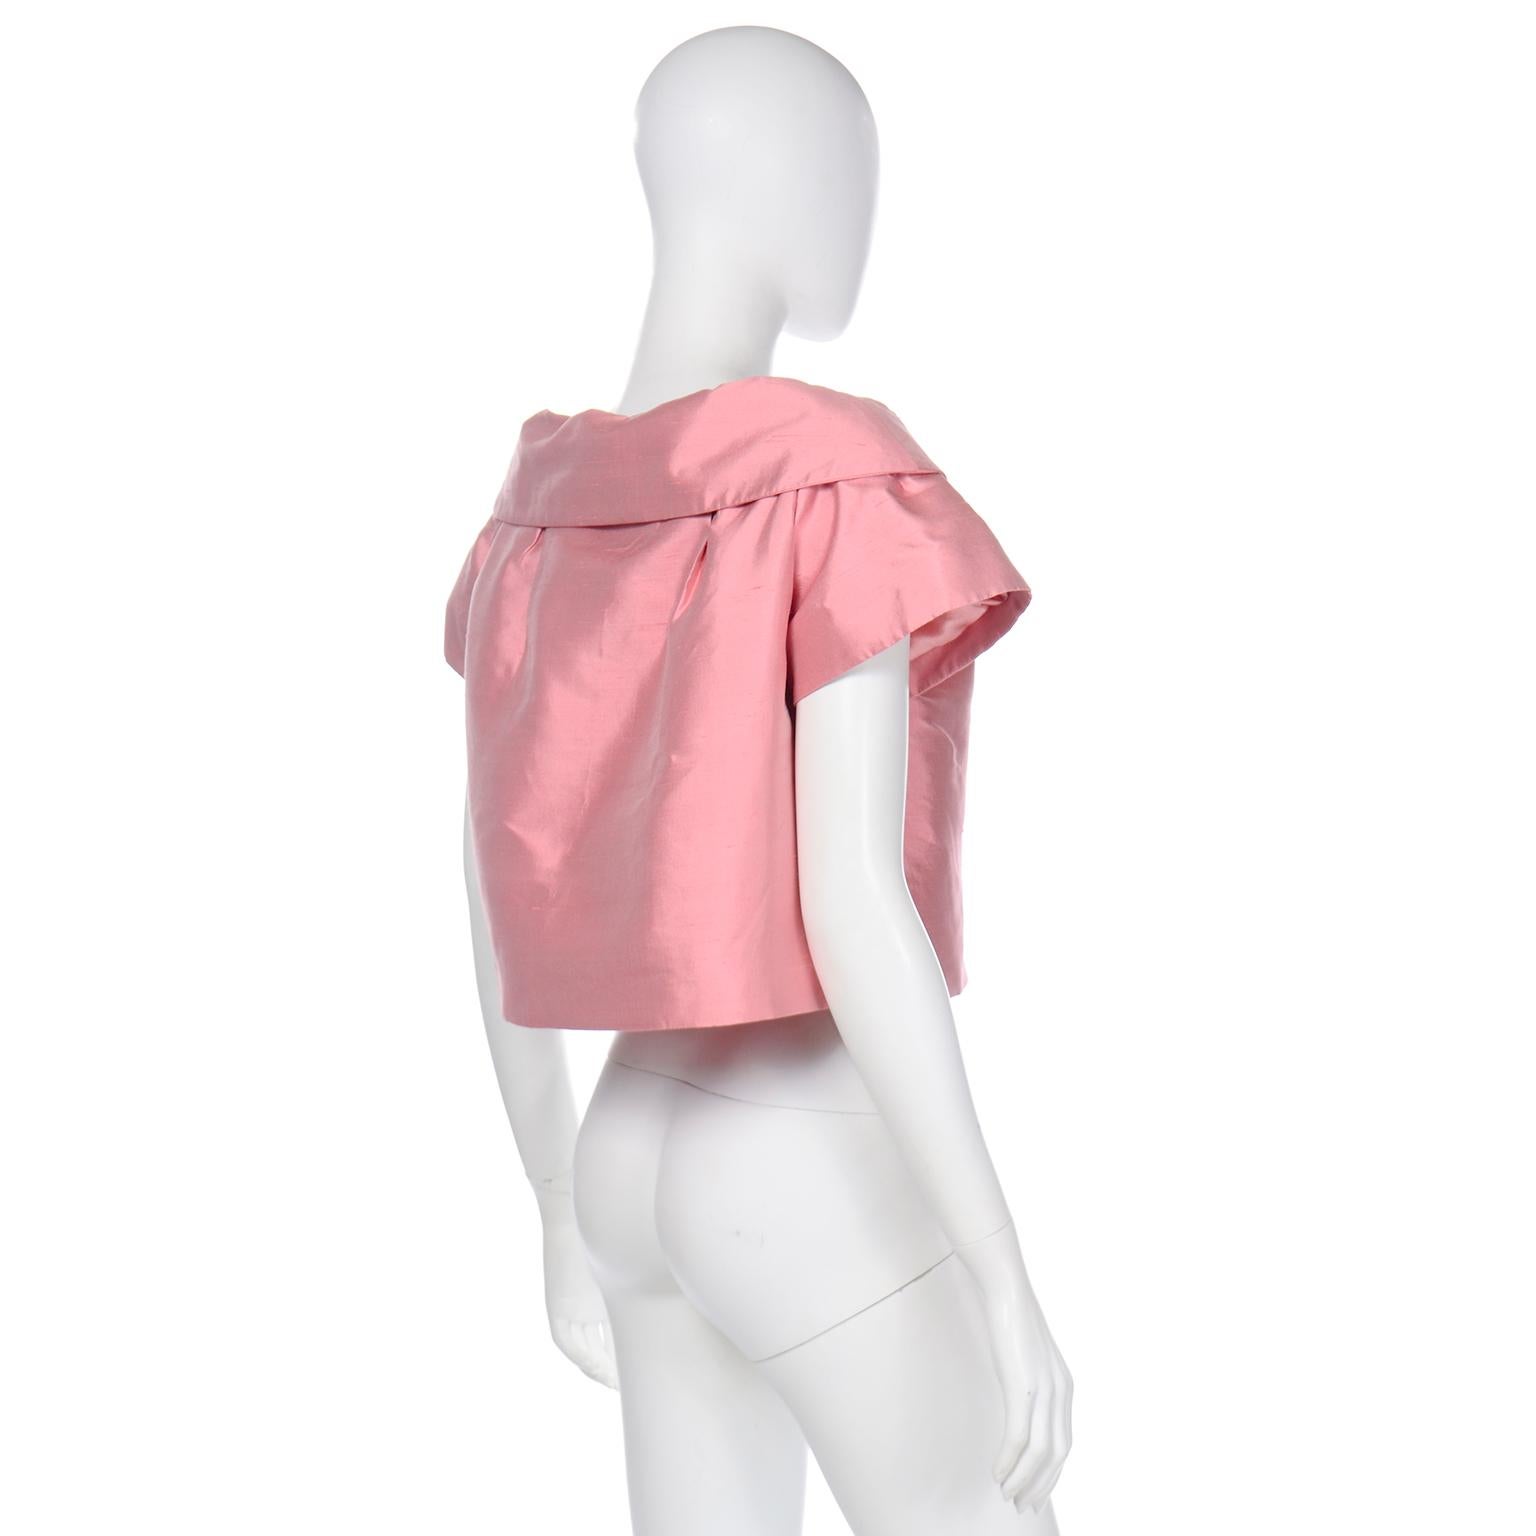 John Galliano for Christian Dior 1960s Inspired Pink 2008 Vintage Jacket Top 3